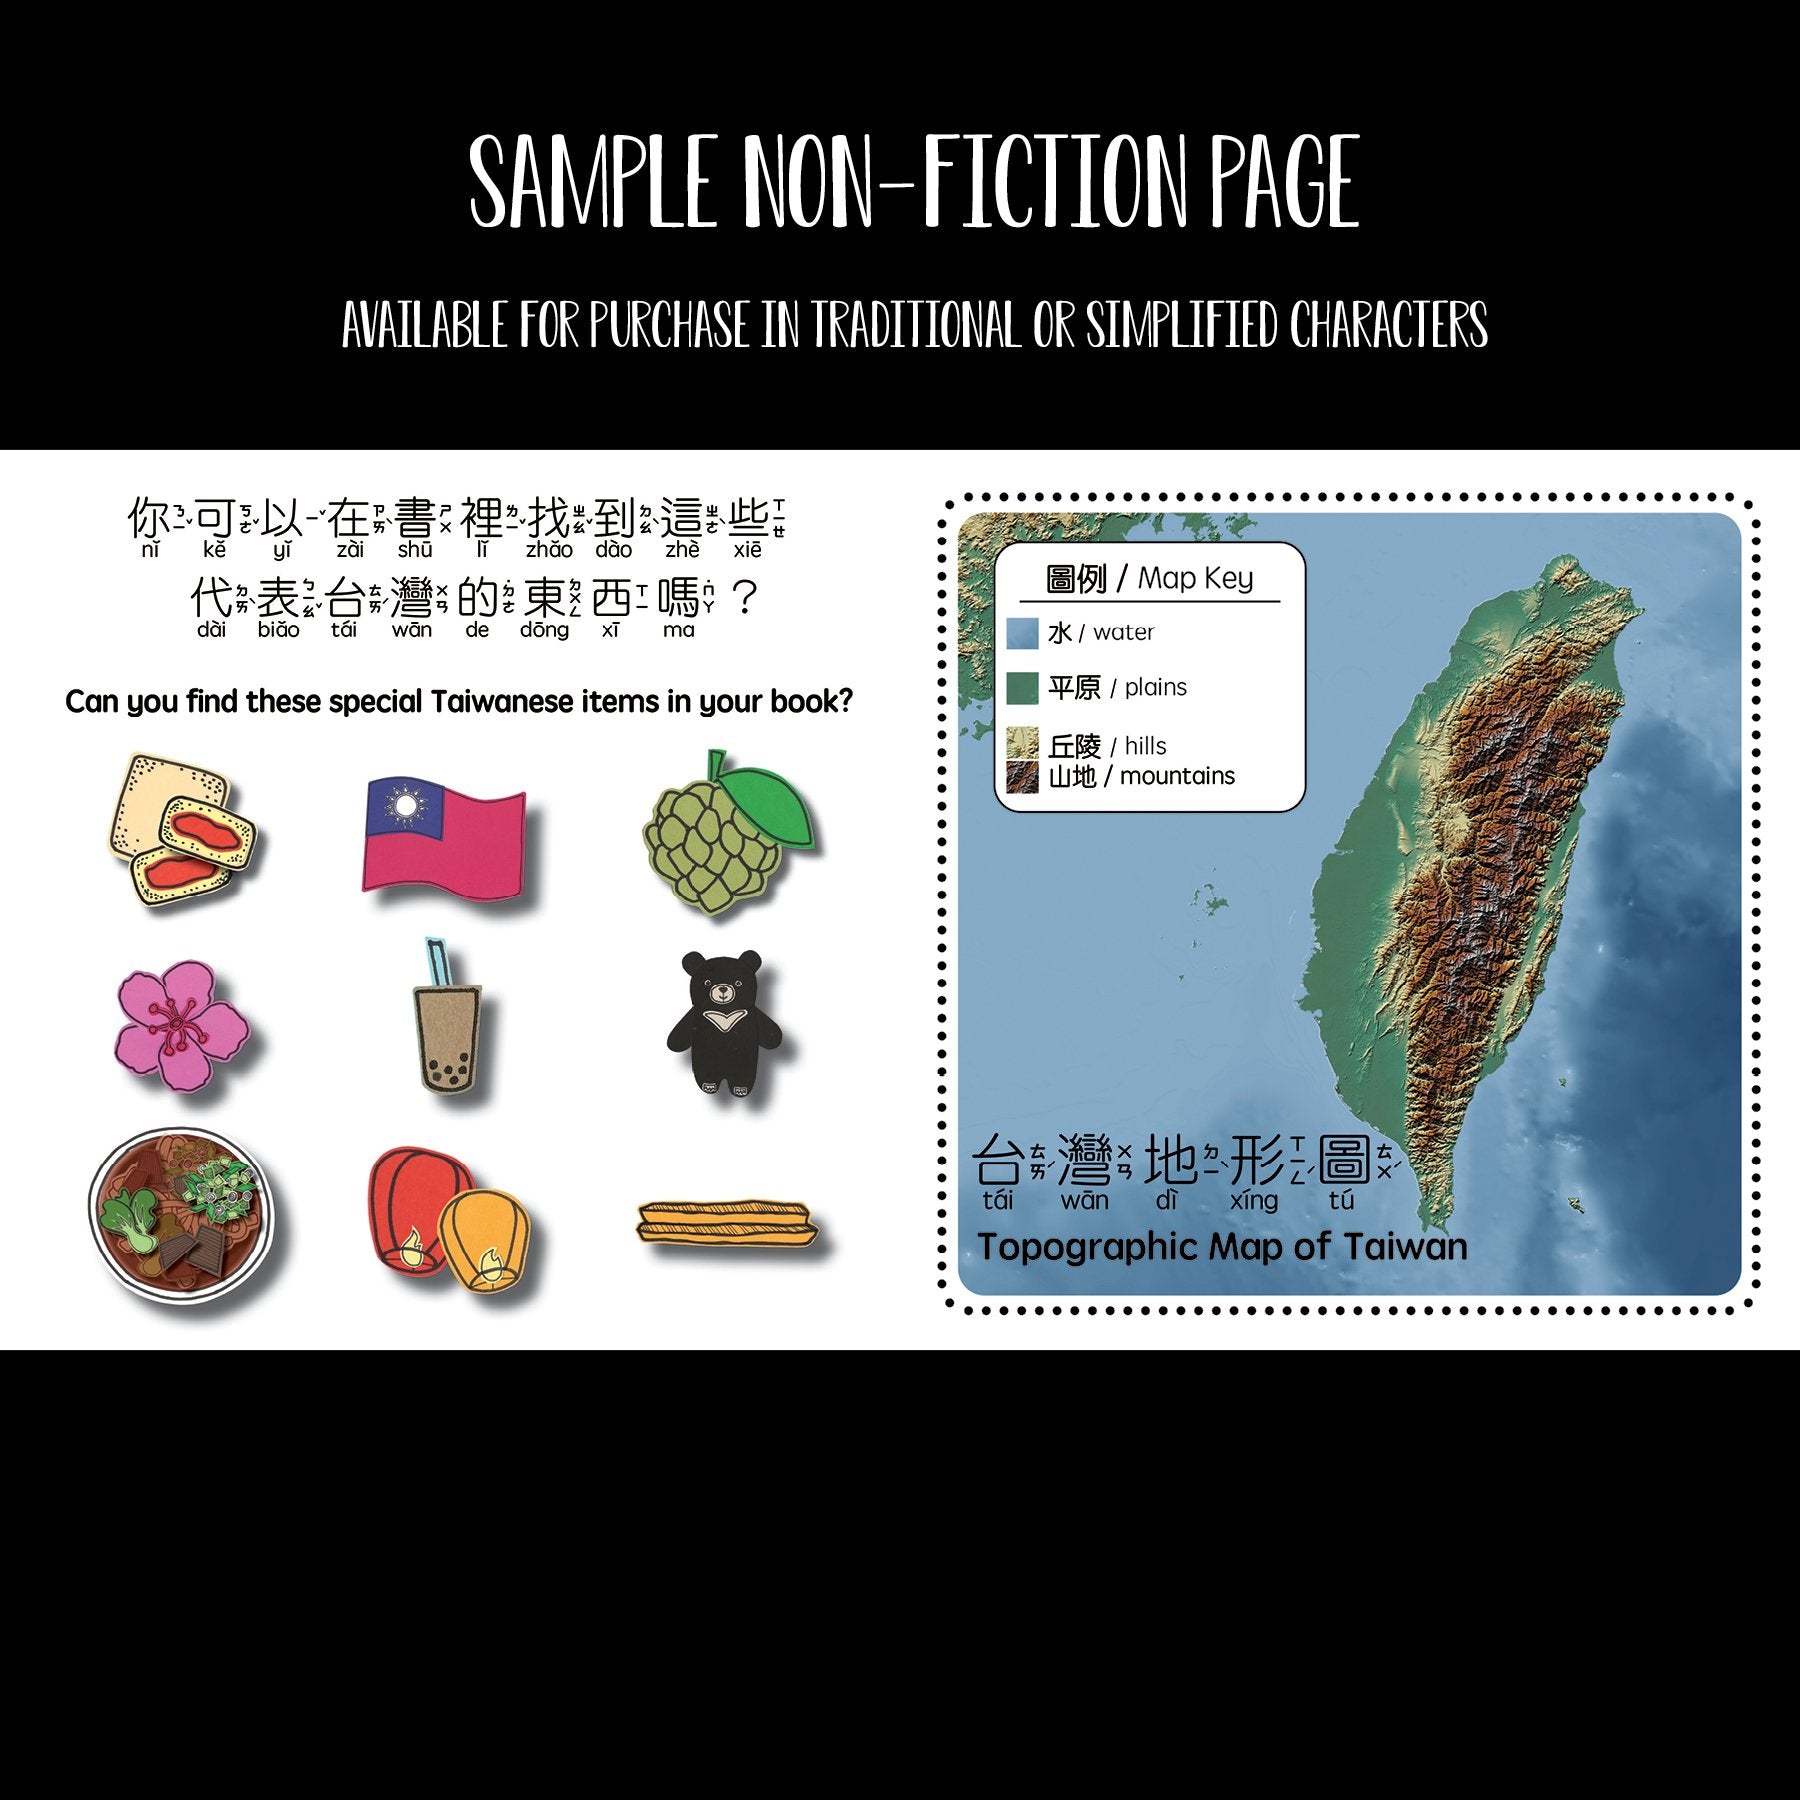 Can you find these special Taiwanese items in your book? 你可以在書裏找到這些代表台灣的東西嗎？Topographic Map of Taiwan. 台灣地形圖.